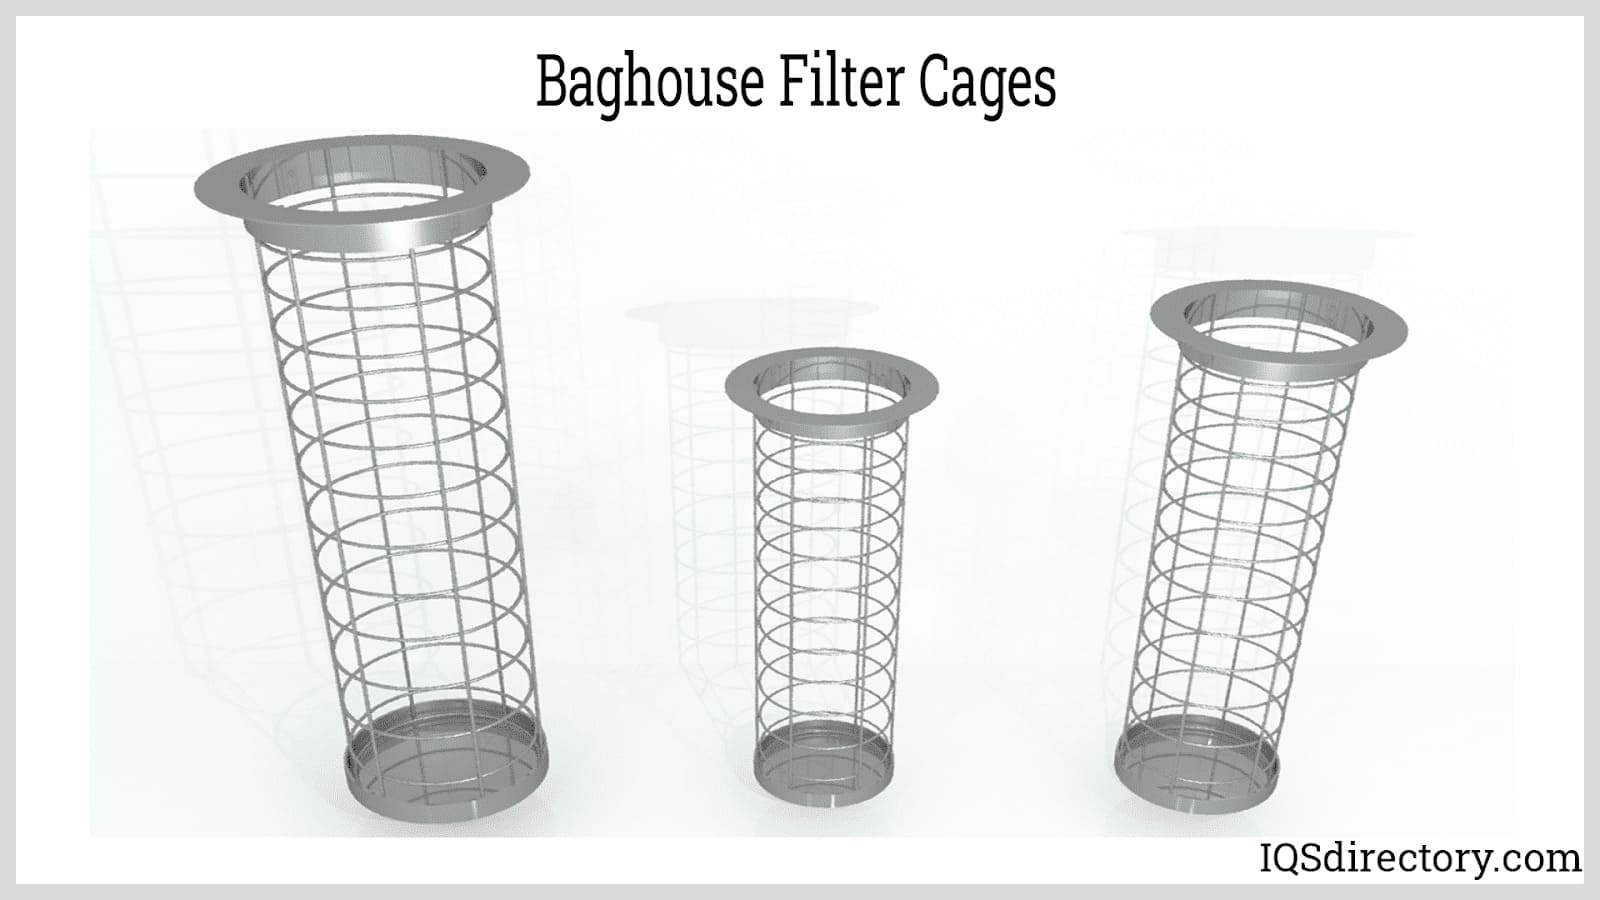 Baghouse Filter Cages